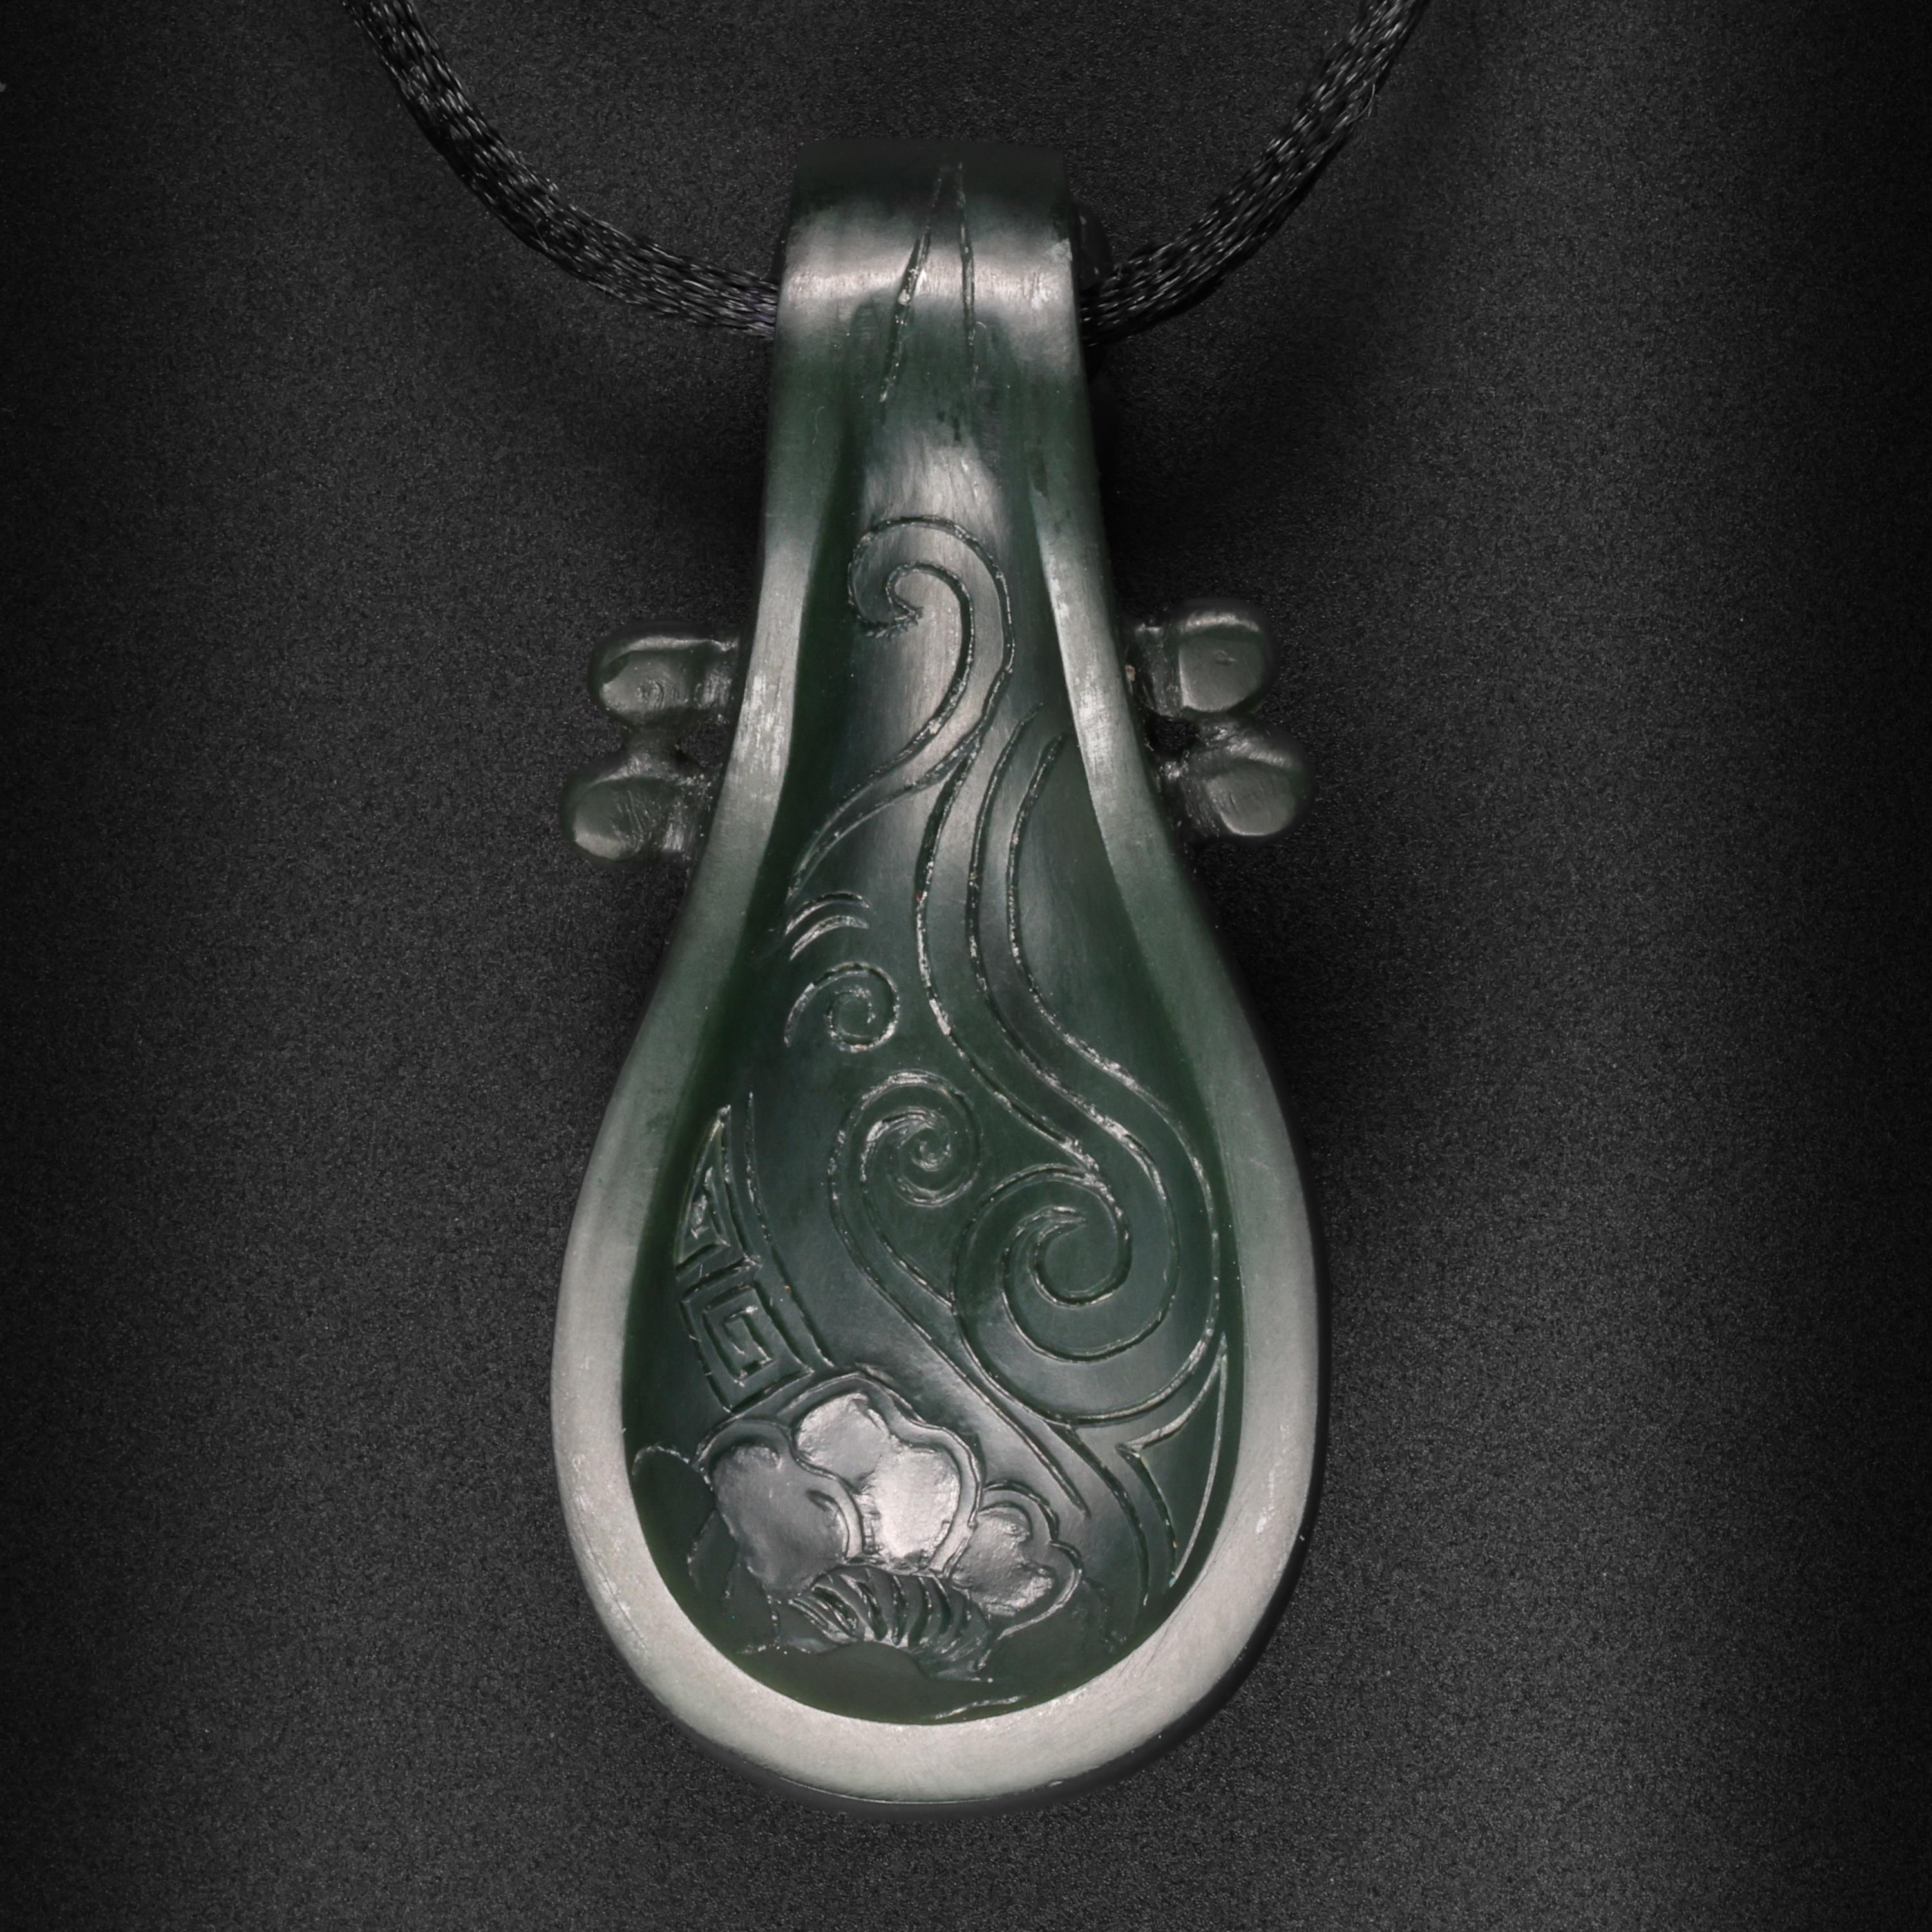 This wonderful and exceedingly rare contemporary, (new) pendant depicts a pipa, which is a Chinese stringed instrument similar to a lute. The pipa was carved from slightly bluish-green Junlun jade, which is sourced from the Kunlun mountains in